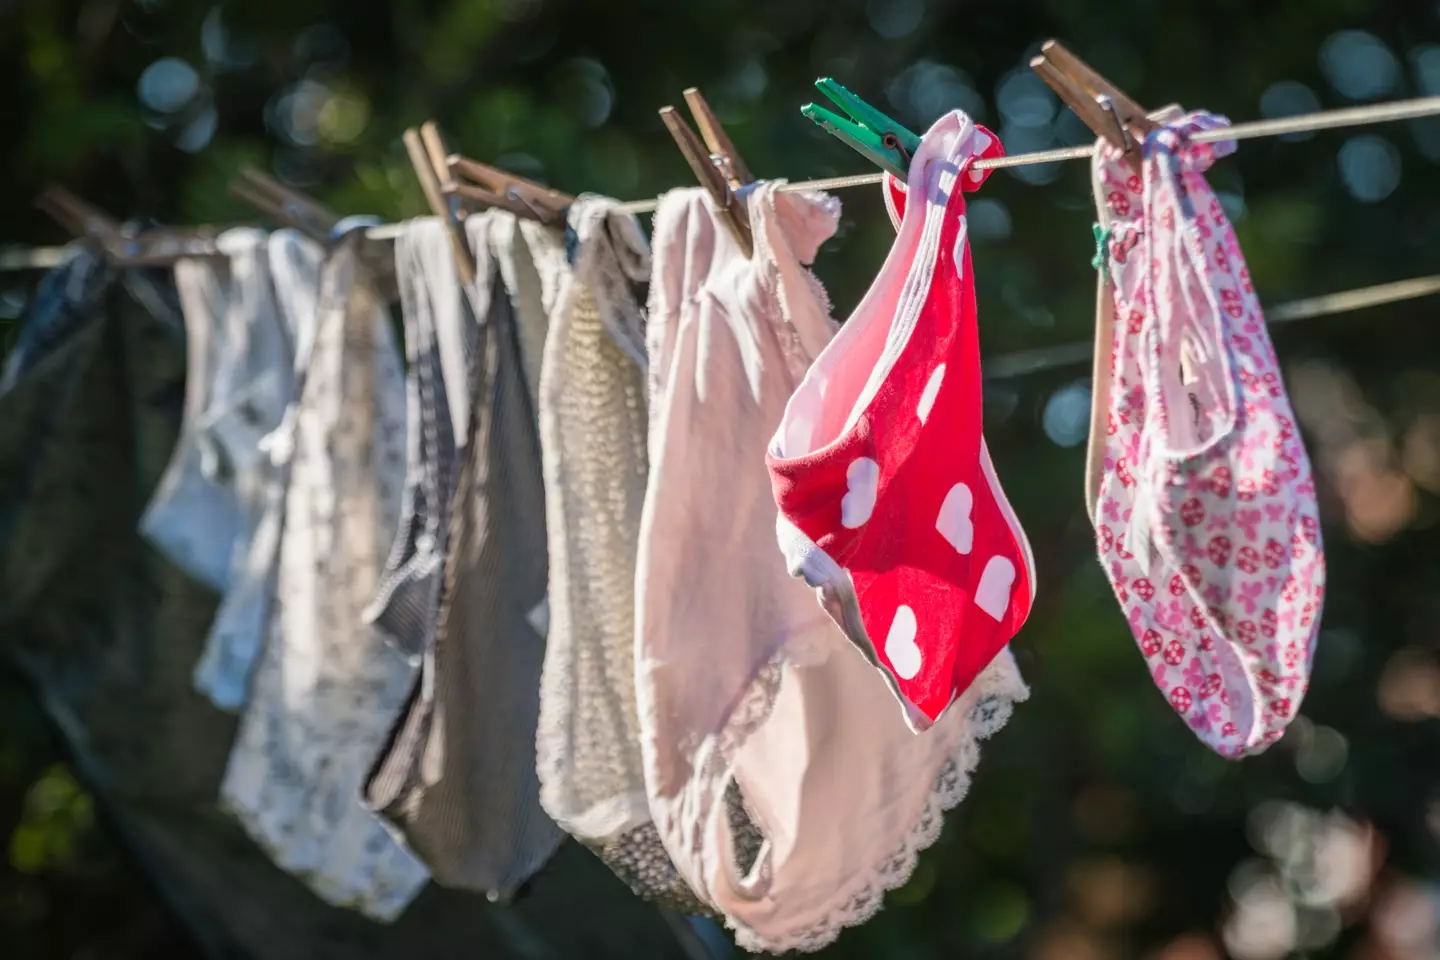 How often do you change your knickers?